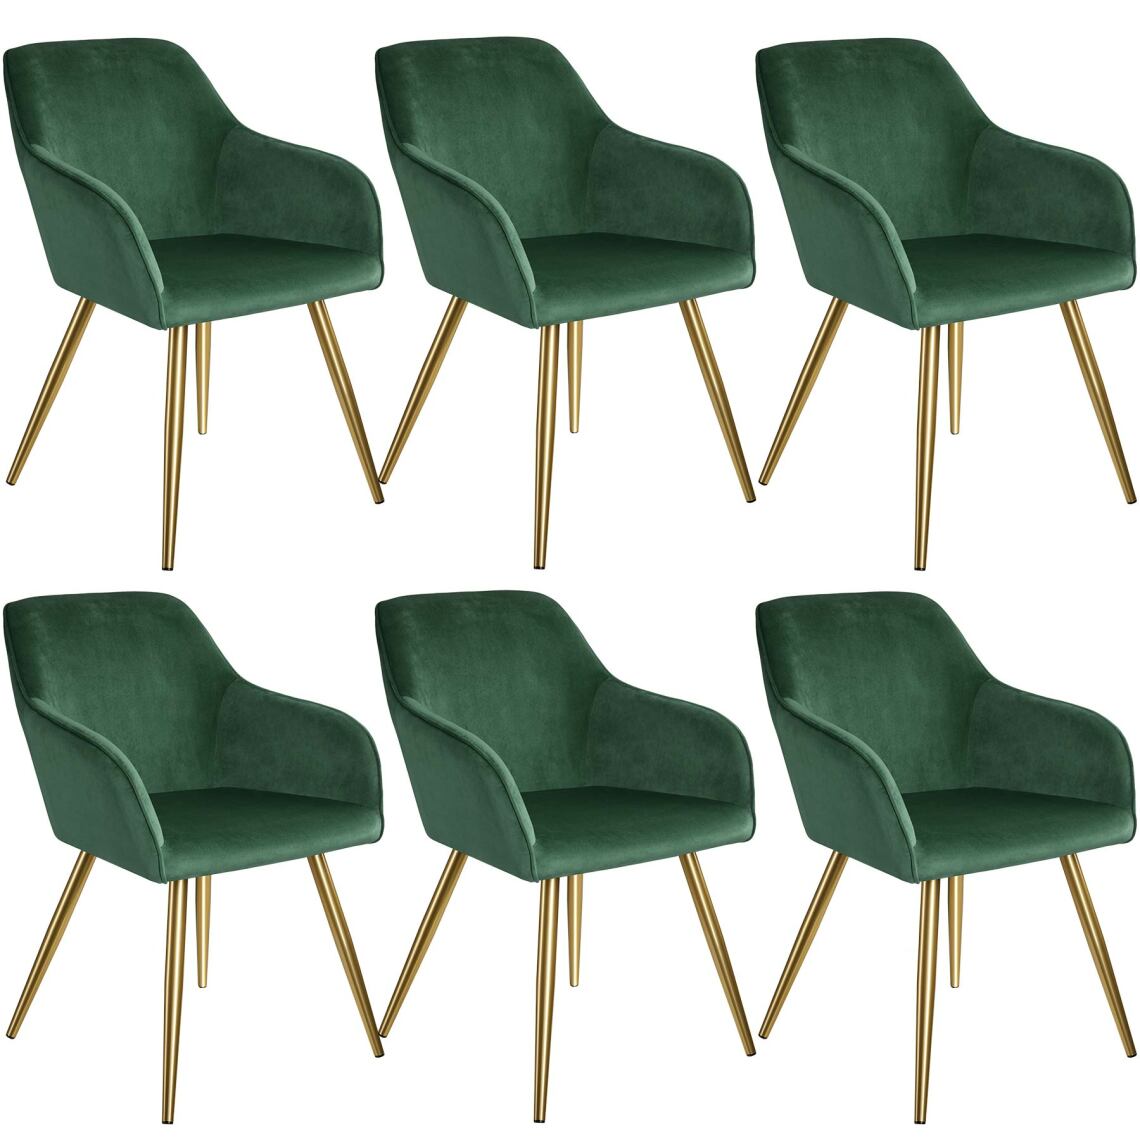 Tectake - 6 Chaises MARILYN Effet Velours Style Scandinave - vert foncé/or - Chaises